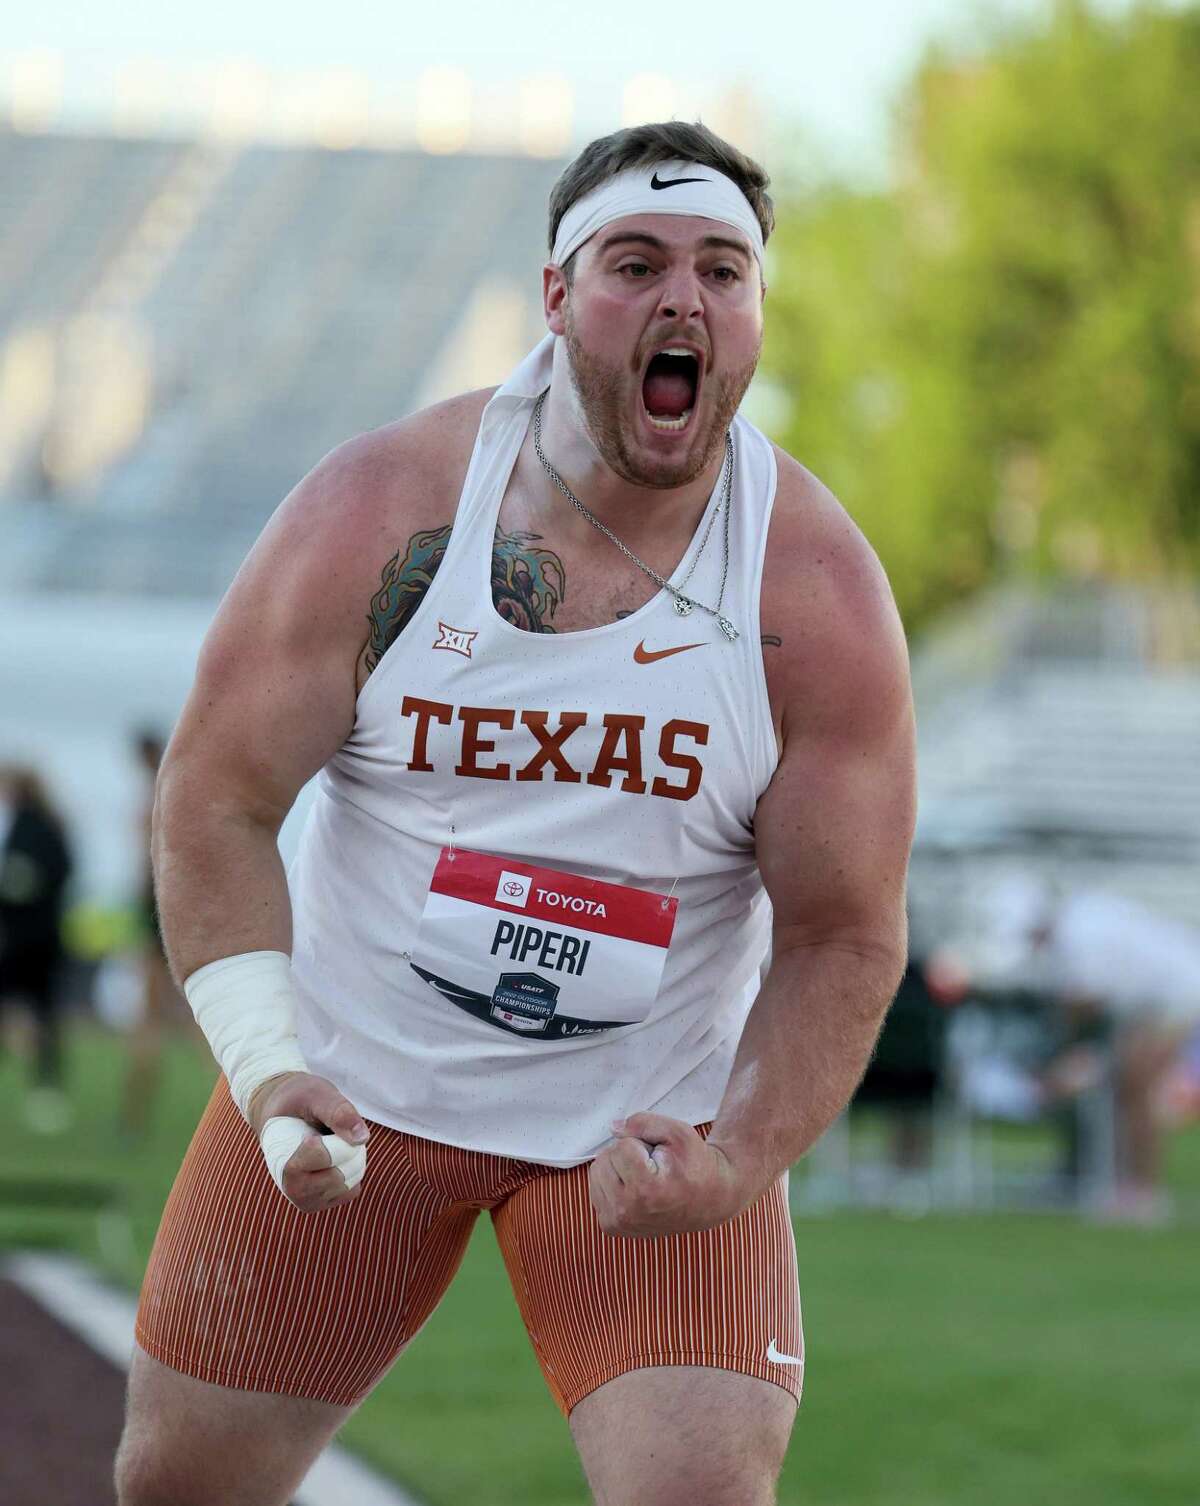 EUGENE, OREGON - JUNE 24: Tripp Piperi finishes fourth in the final of the Men Shot Put during the 2022 USATF Outdoor Championships at Hayward Field on June 24, 2022 in Eugene, Oregon. (Photo by Andy Lyons/Getty Images)